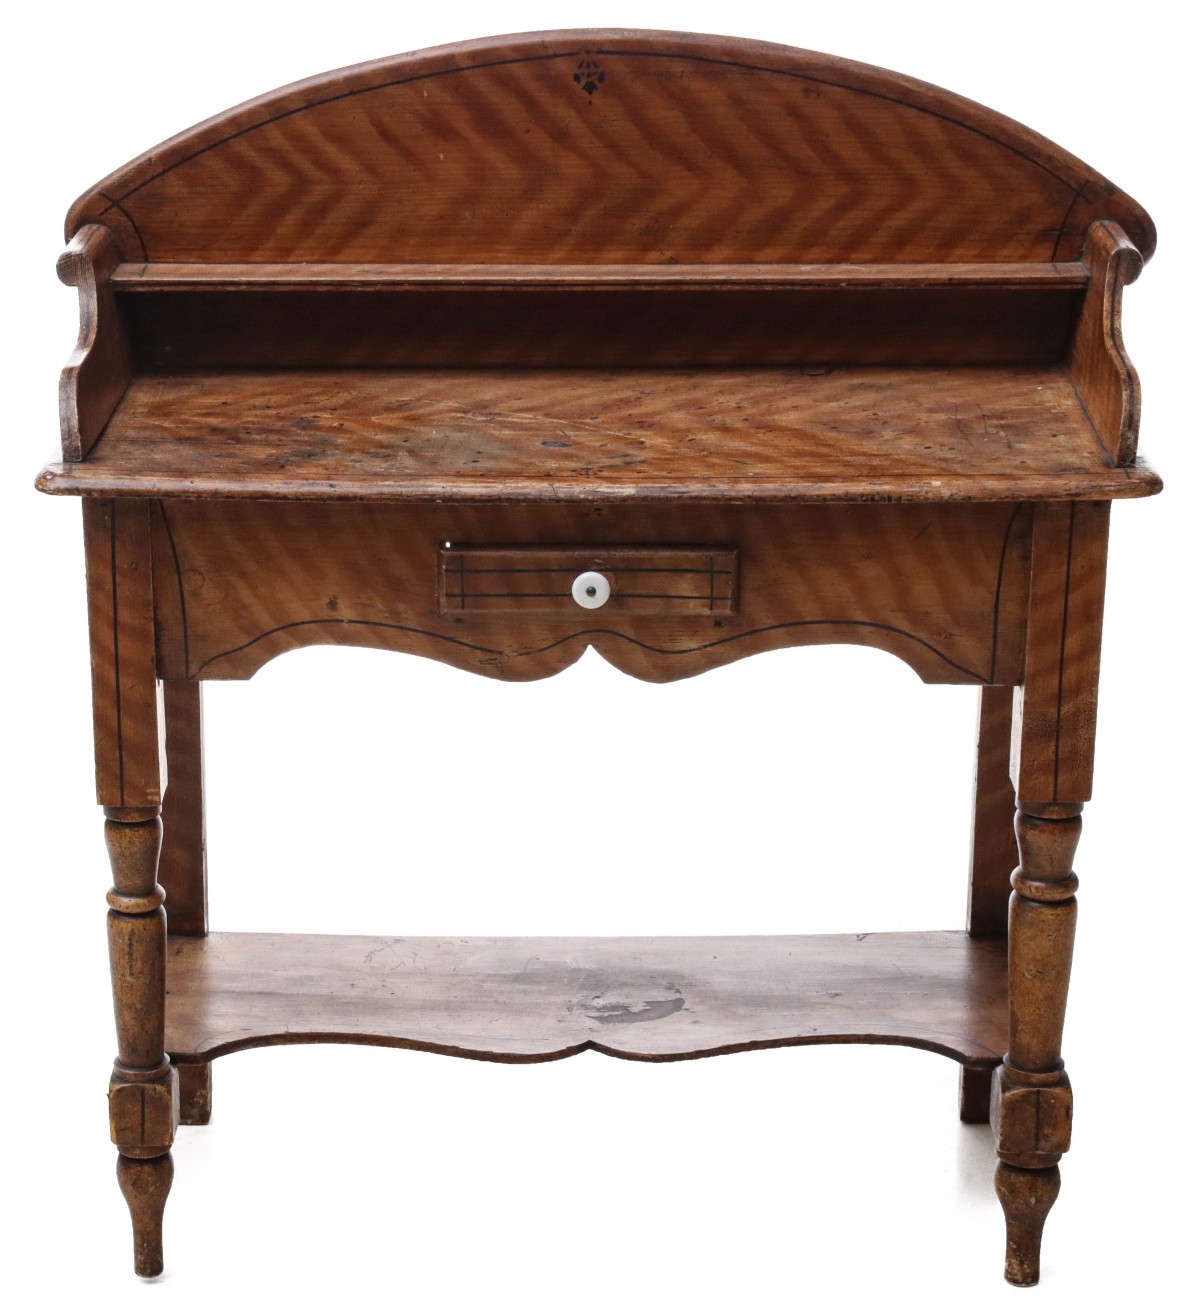 A 19TH CENTURY WASH STAND WITH ORIGINAL GRAIN PAINT